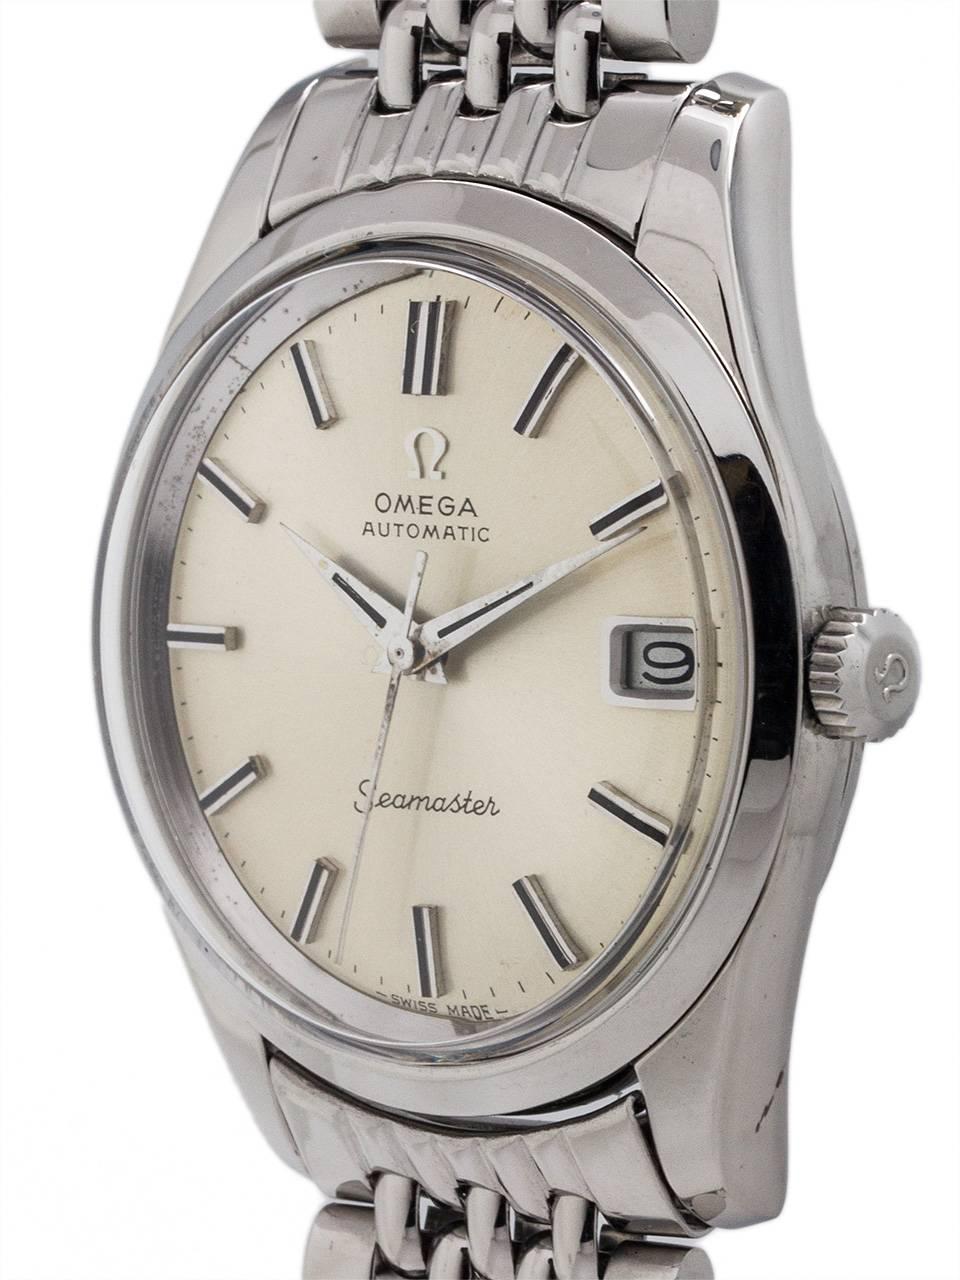 A truly exceptional example Omega Seamaster automatic with date ref 168.024 stainless steel circa 1968. Featuring a robust 35 x 42mm diameter case with smooth wide bezel, substantial contoured lugs and acrylic crystal with signed Omega crown and